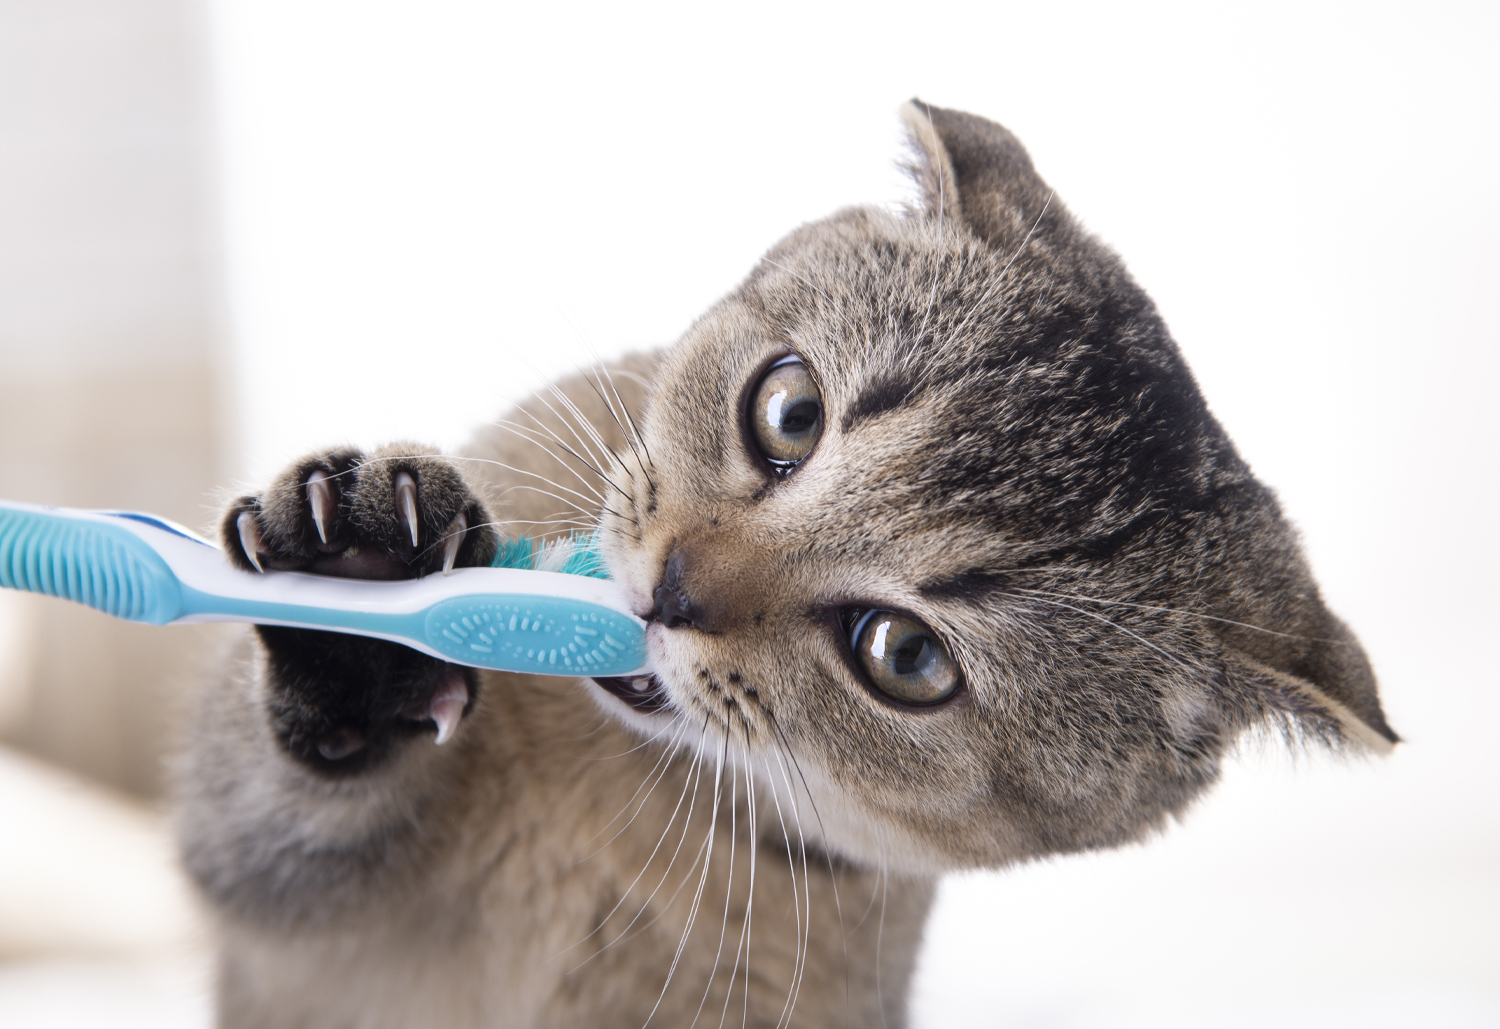 Cath with Toothbrush - Do I Really Need A Dental Cleaning for My Pet?